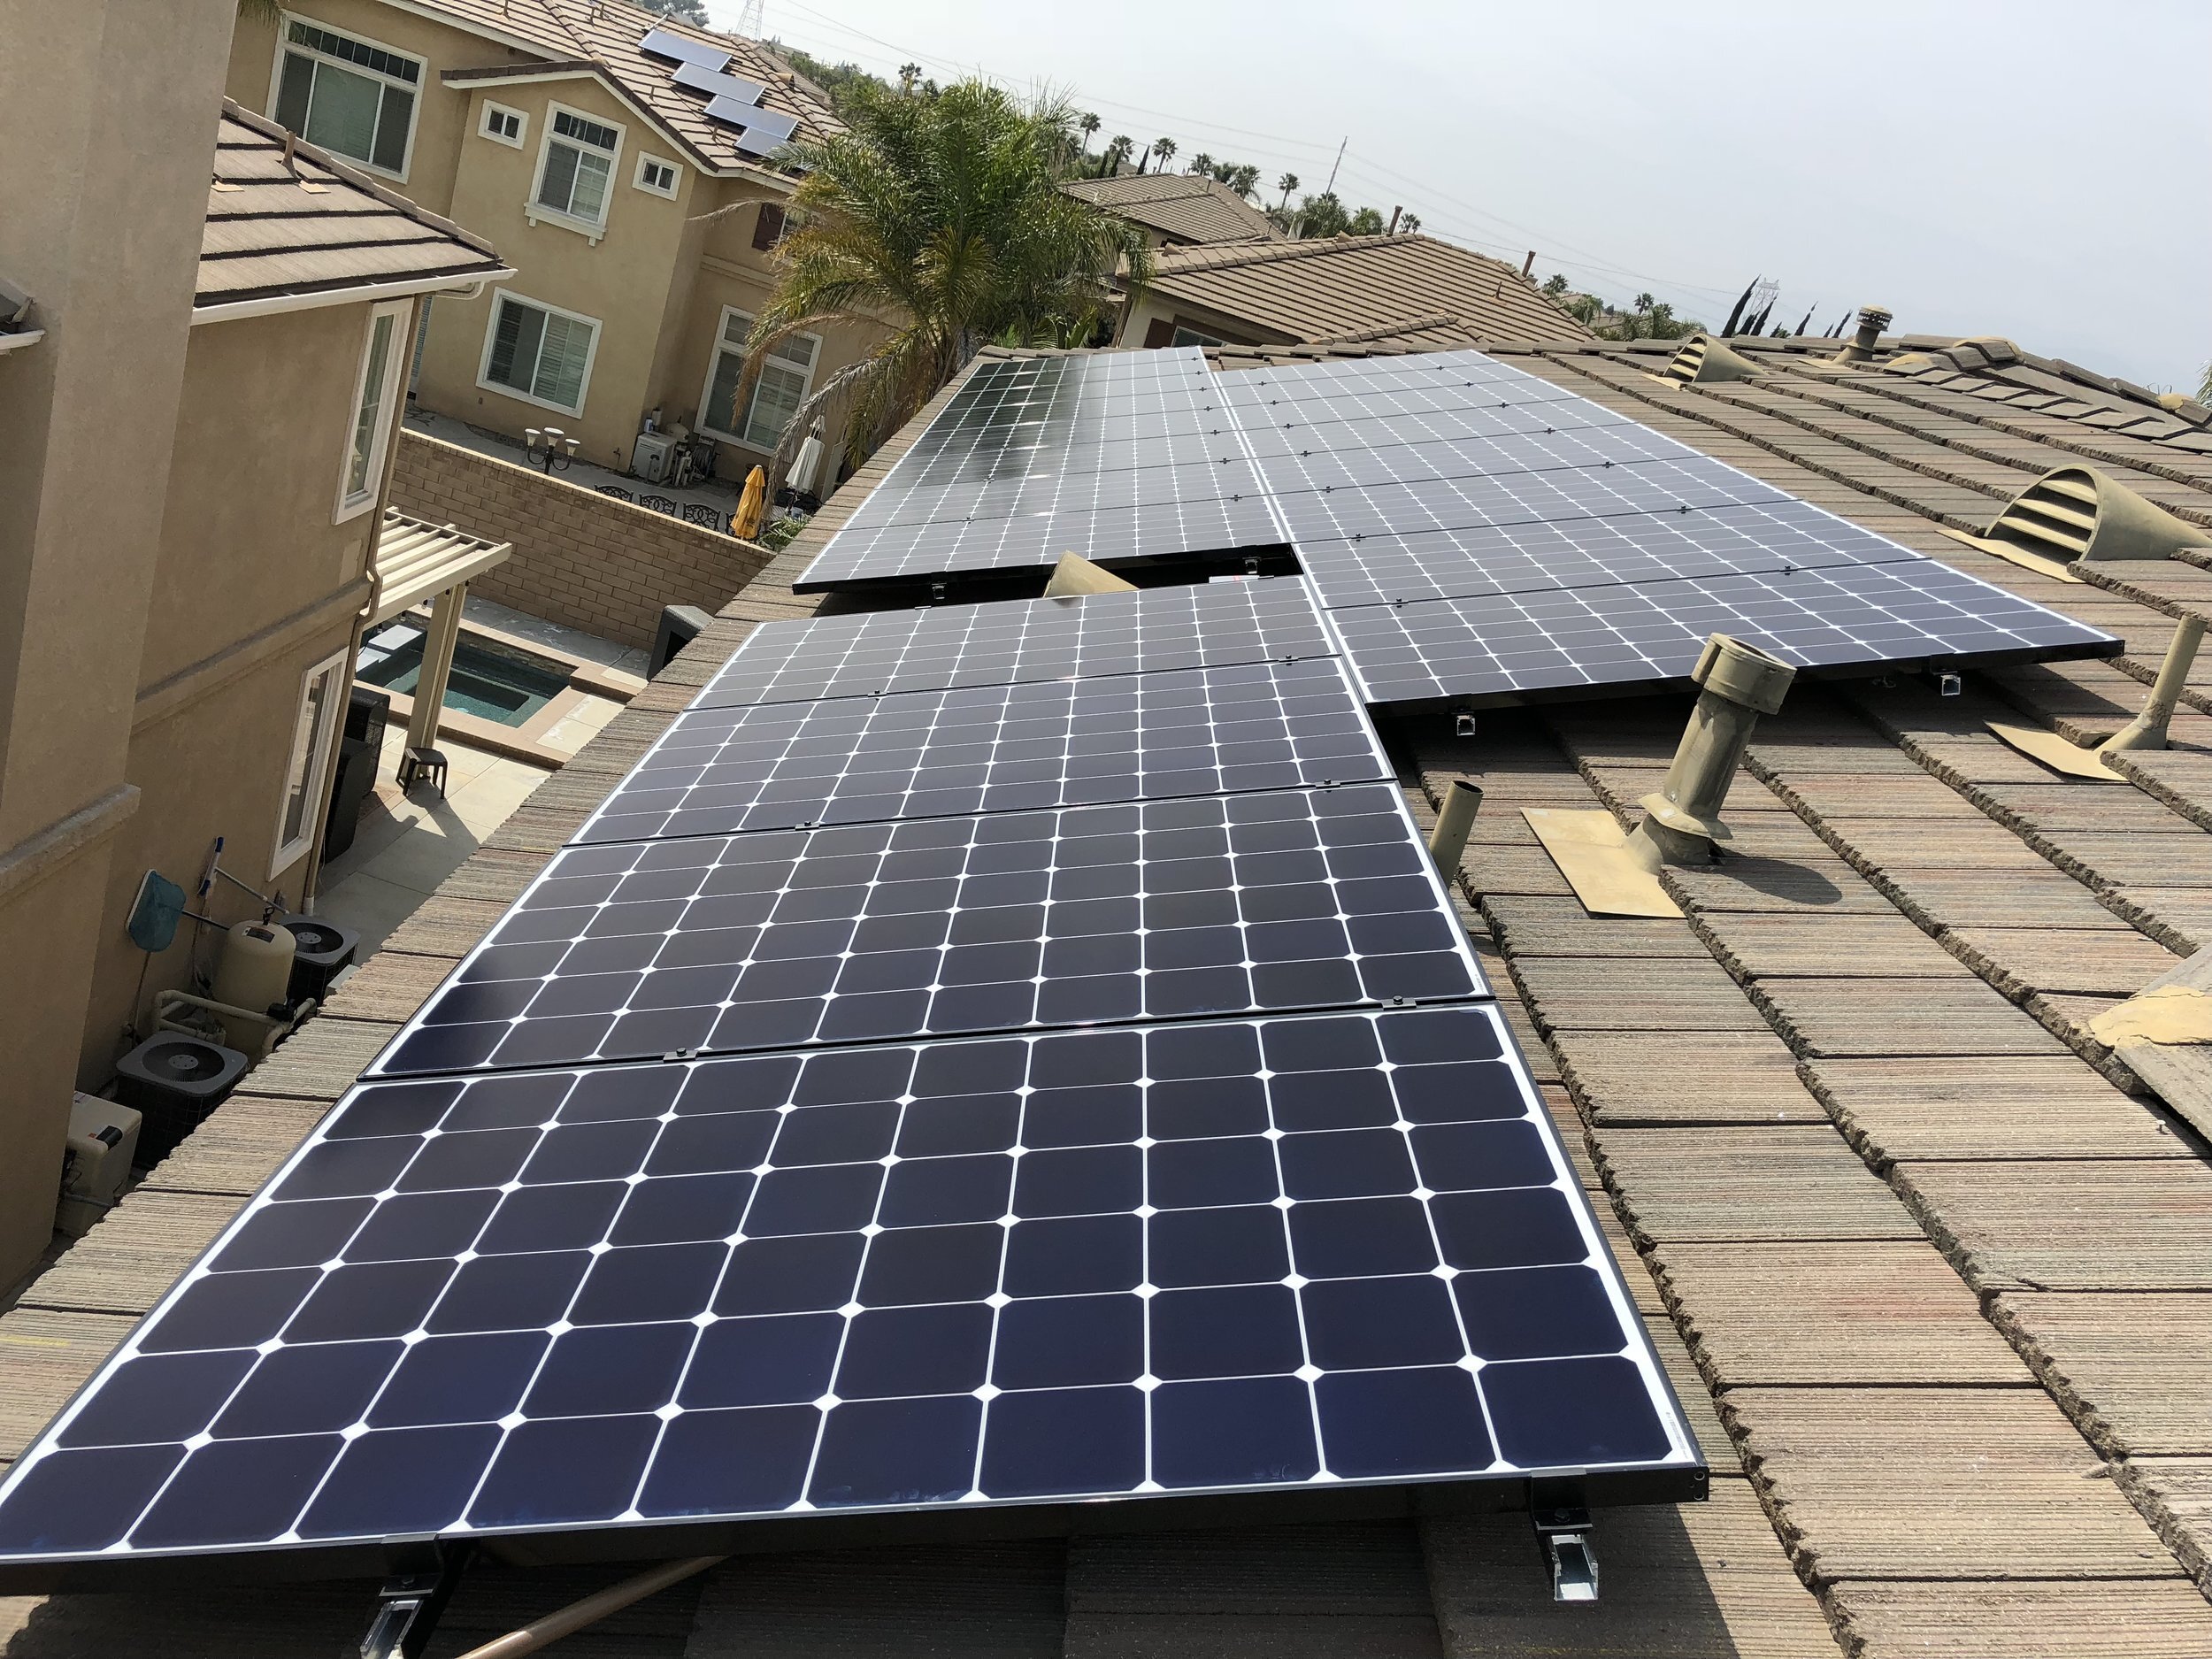 What Happens During a Roof Inspection for Solar Panels?